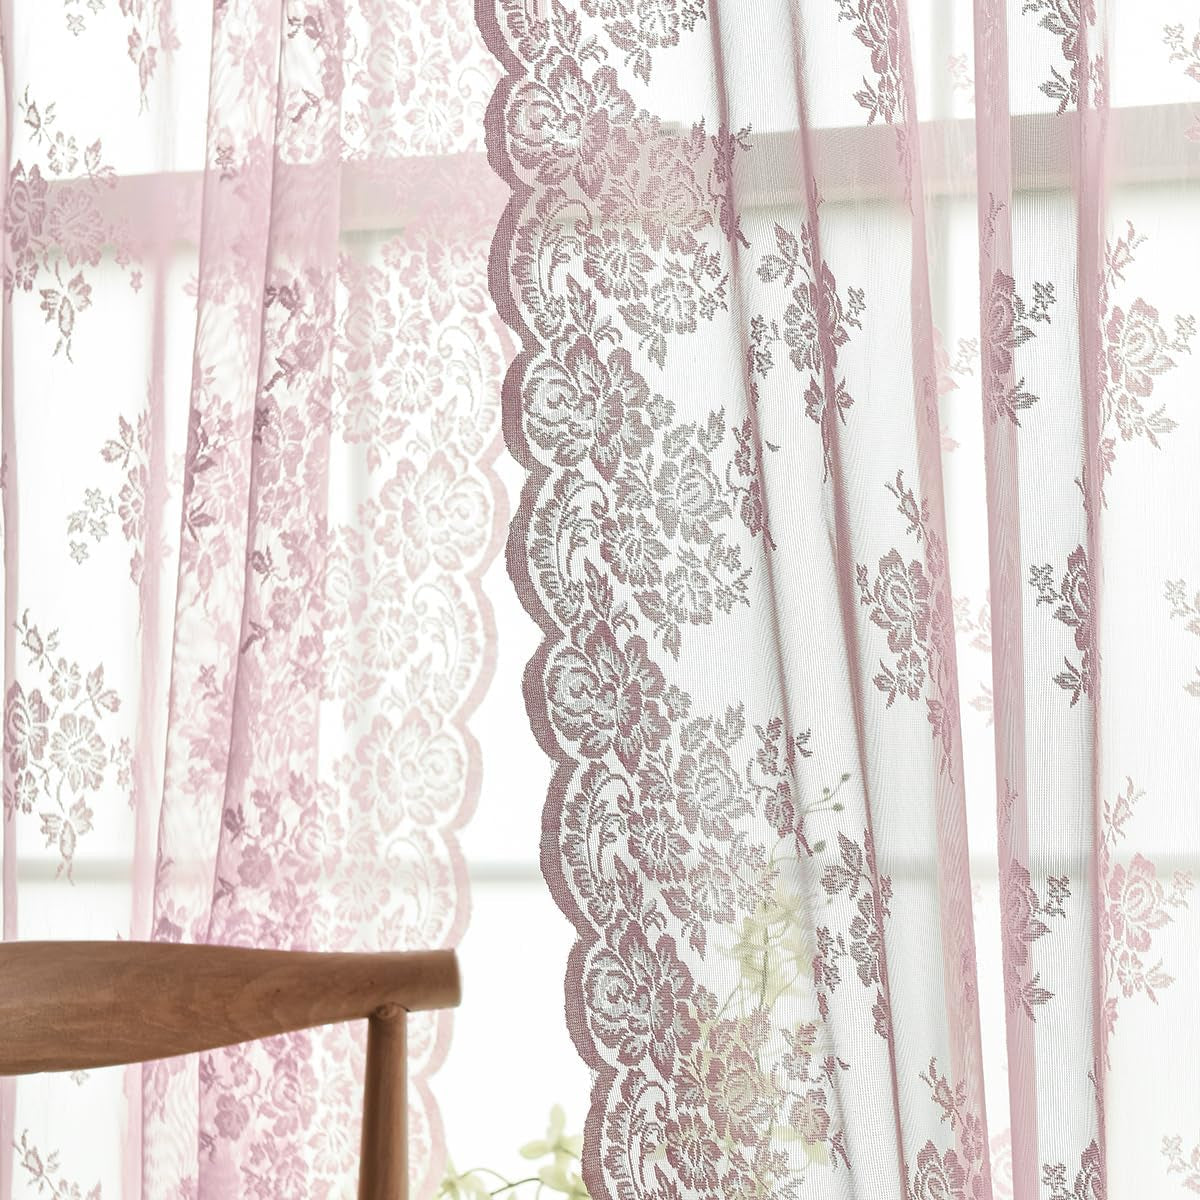 Kotile Sage Green Sheer Valance Curtain for Windows, Rustic Floral Spring Sheer Window Valance Curtain 18 Inch Length, Light Filtering Rod Pocket Lace Valance, 52 X 18 Inch, 1 Panel, Sage Green  Kotile Textile Pink 52 In X 63 In Grommet 